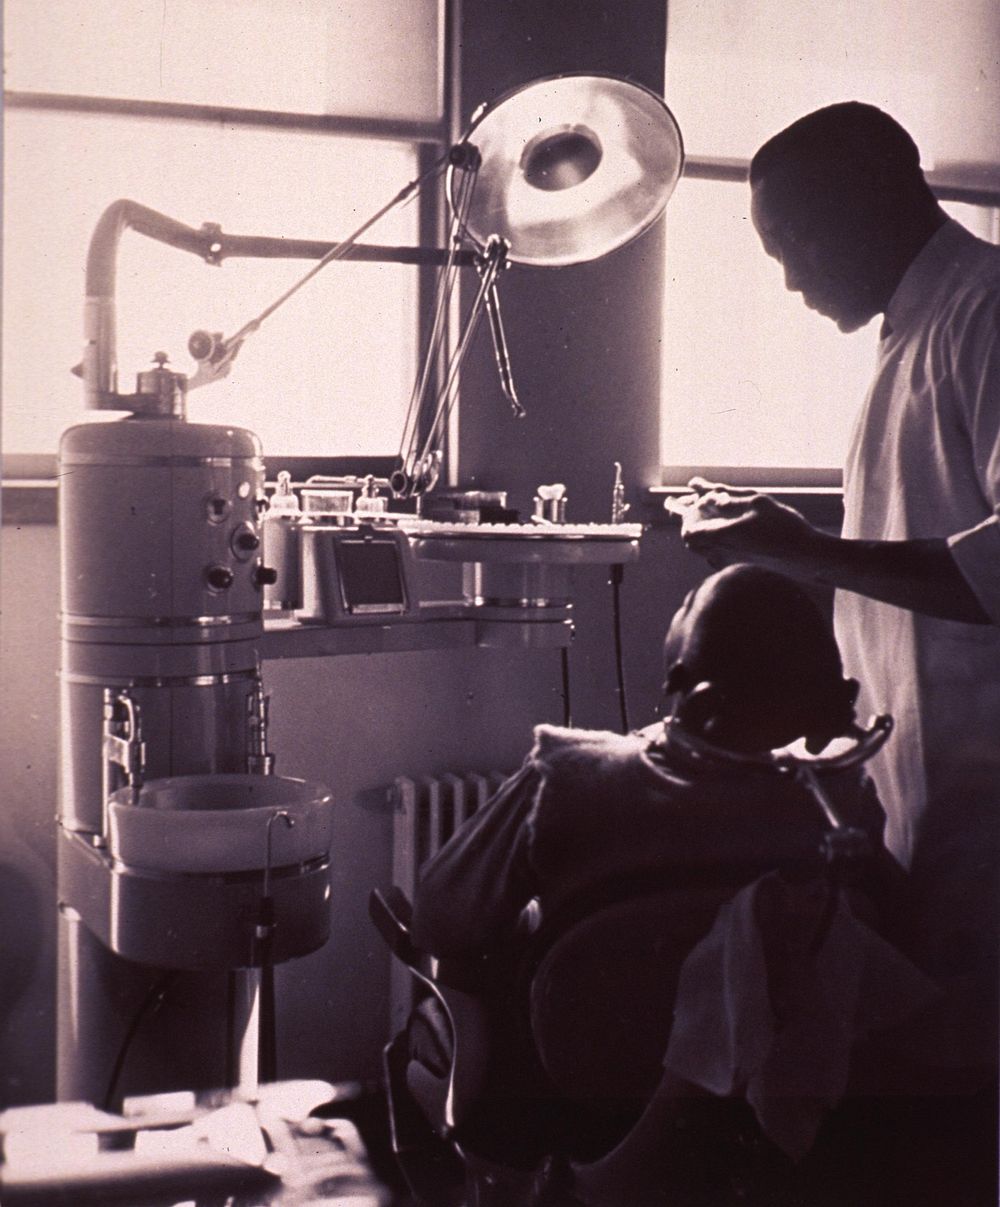 Dental office visit. Abstract: Interior view of a dental office with an African American patient sitting in the dental chair…